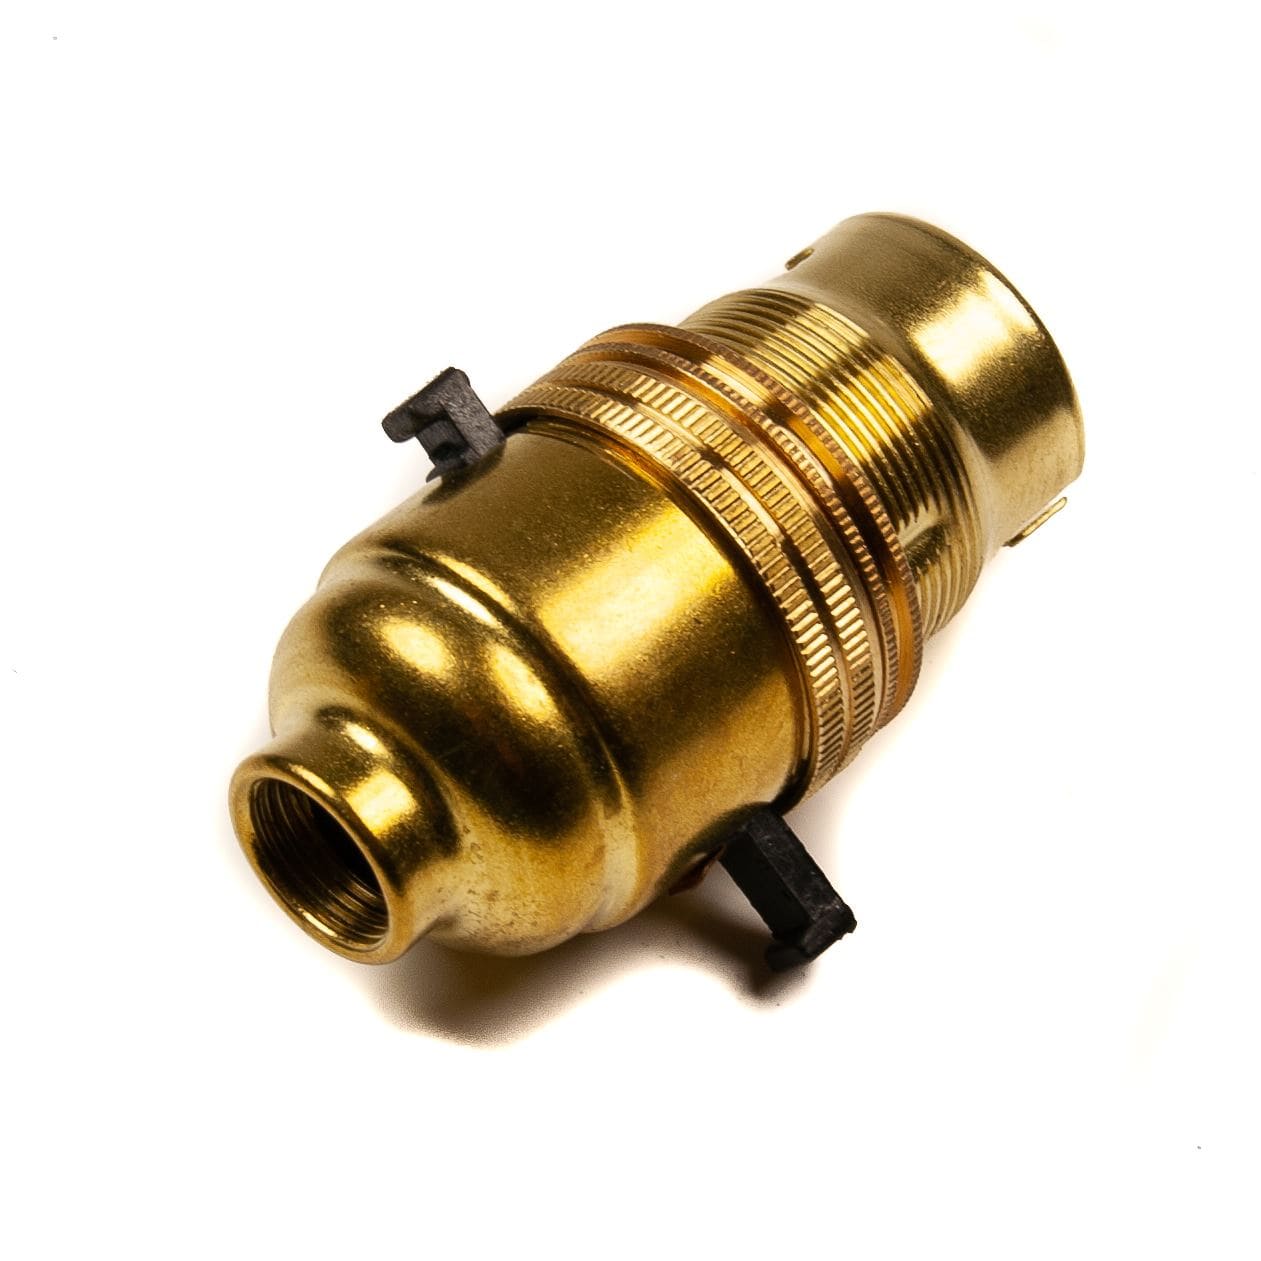 Switched Lamp Holder Brass Bayonet Cap (BC) (B22d) 1/2" Screw Thread Switched Lampholders Thunderfix 100446